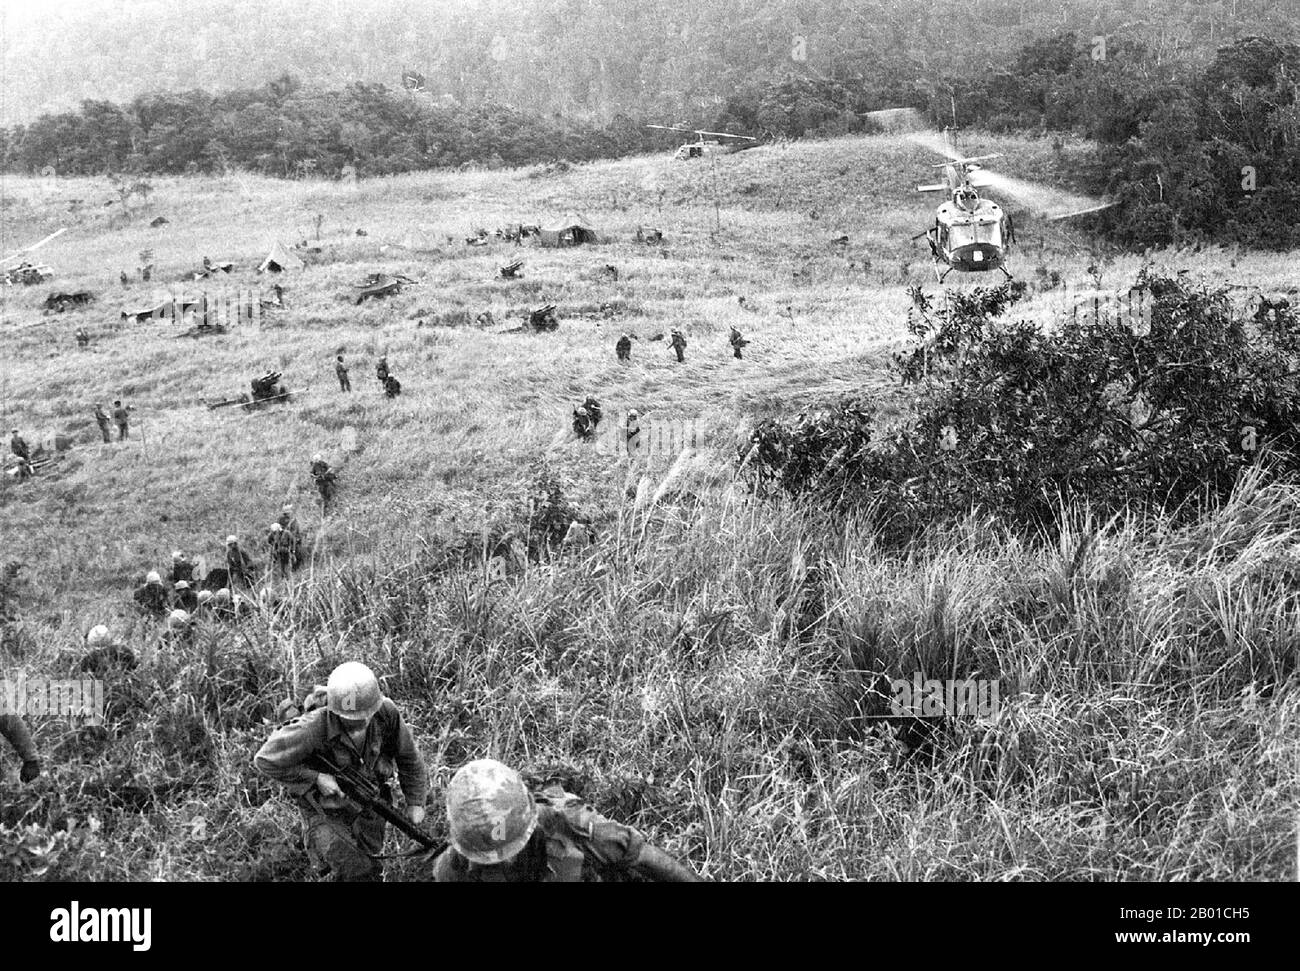 Vietnam: US Army troops of the 1st Cavalry Division deploy at an LZ ('Landing Zone') in the Central Highlands, Operation Crazy Horse, 1966.  The Second Indochina War, known in America as the Vietnam War, was a Cold War era military conflict that occurred in Vietnam, Laos, and Cambodia from 1 November 1955 to the fall of Saigon on 30 April 1975. This war followed the First Indochina War and was fought between North Vietnam, supported by its communist allies, and the government of South Vietnam, supported by the U.S. and other anti-communist nations. Stock Photo